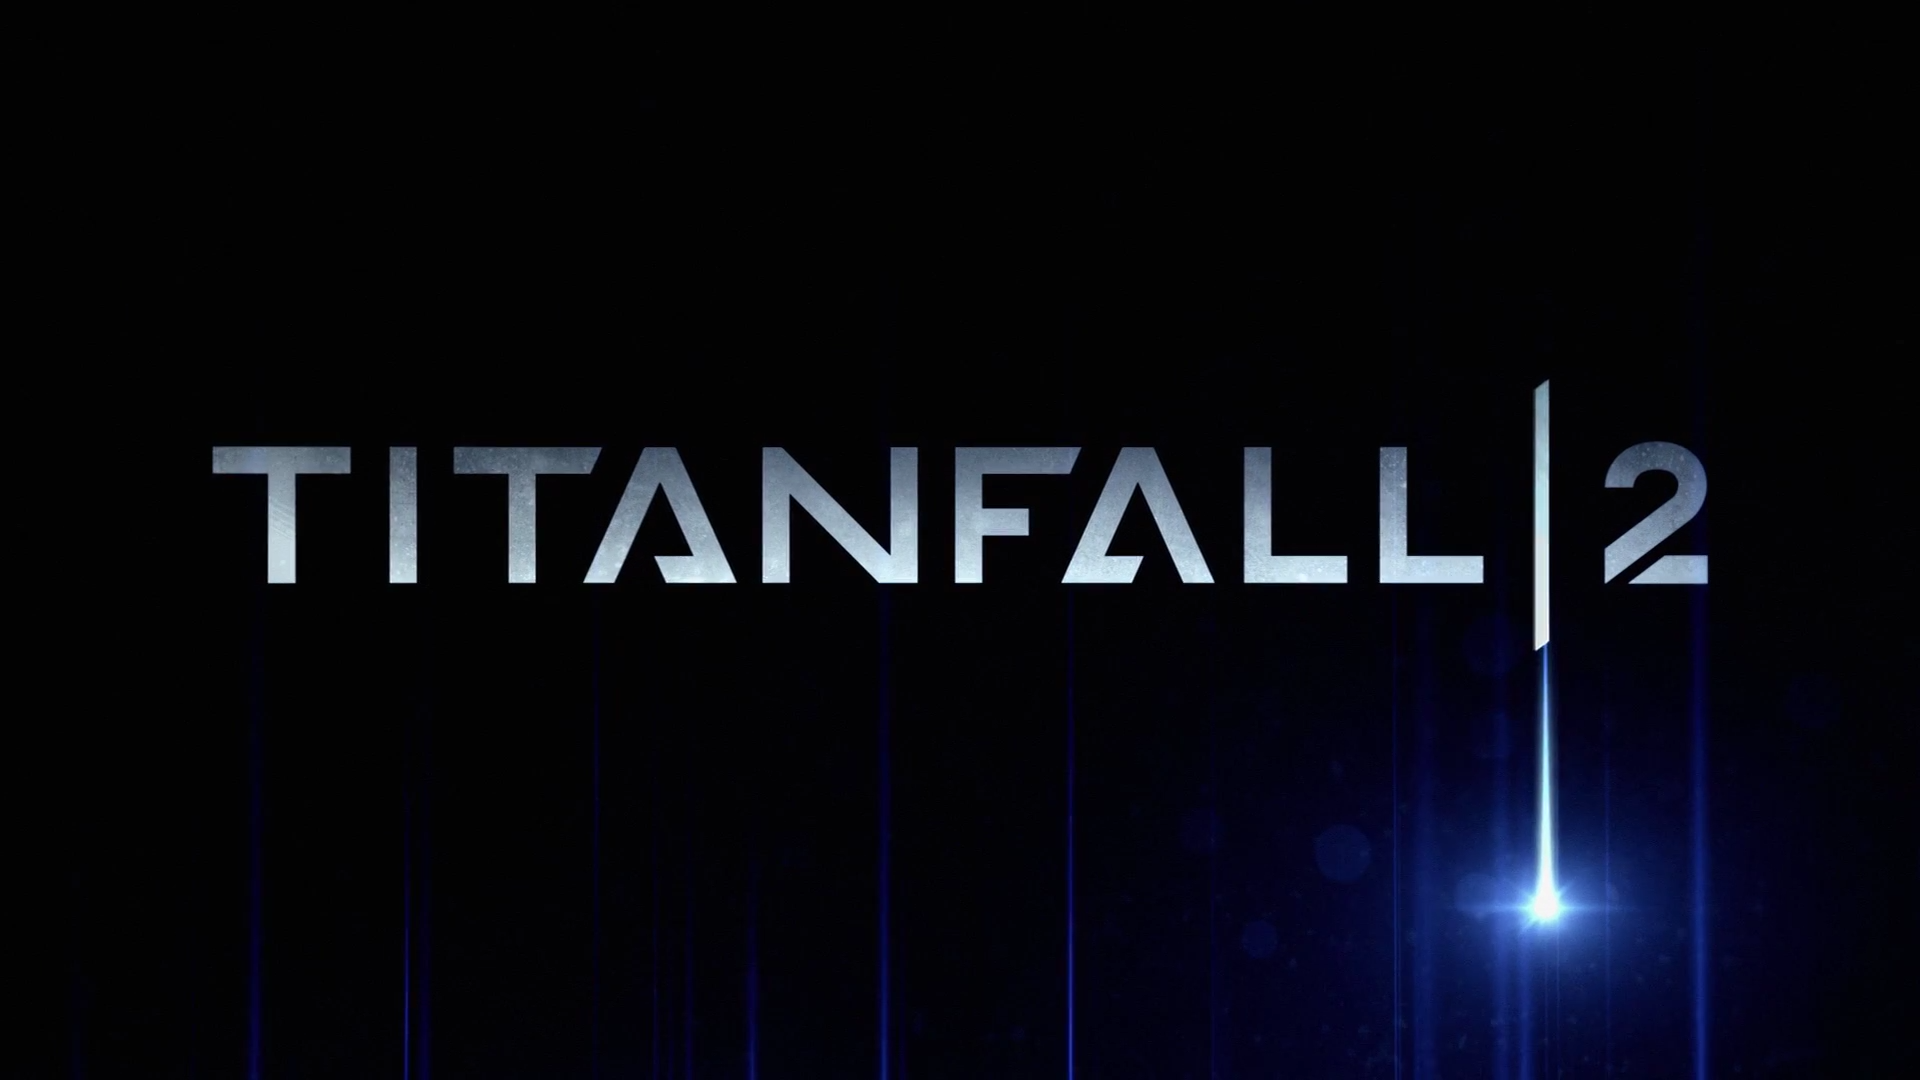 80 Titanfall 2 Hd Wallpapers And Backgrounds